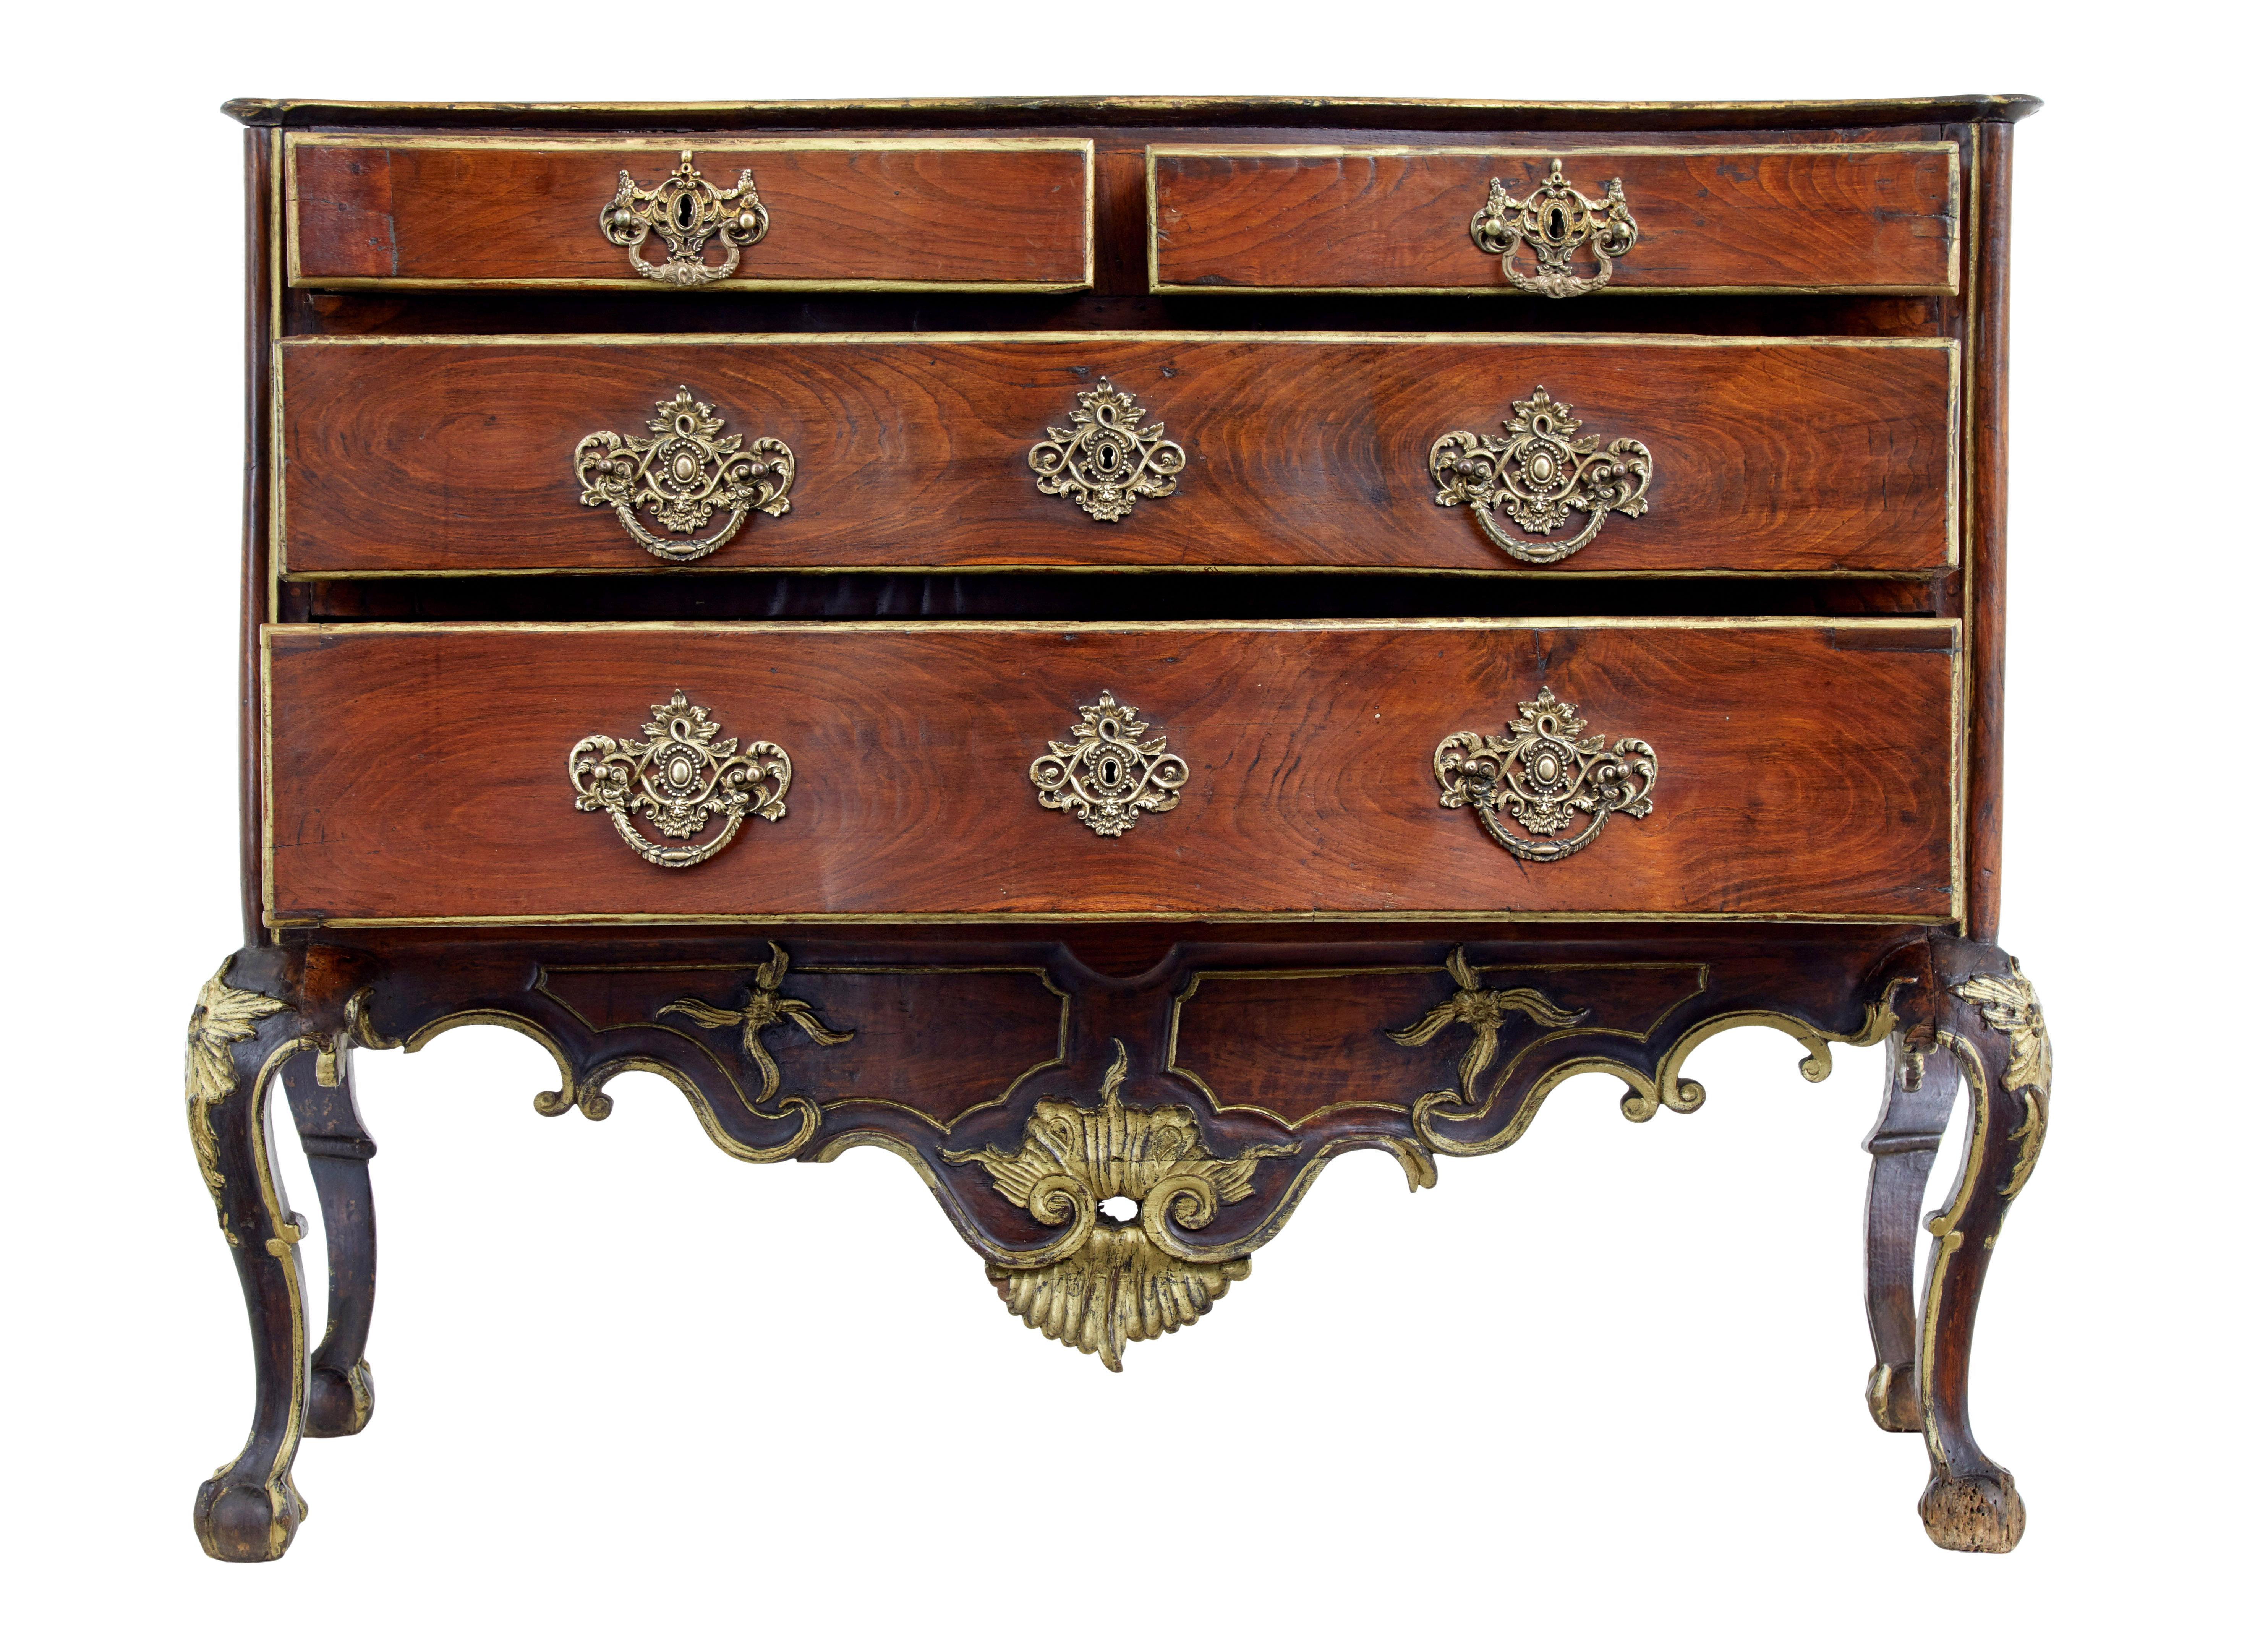 Portuguese 18th century carved walnut and gilt commode circa 1770.

Stunning quality portuguese chest of drawers, which sums up perfectly the over indulgence of the period.

Dom jose period, fitted with 2 short over 2 long drawers profusely carved